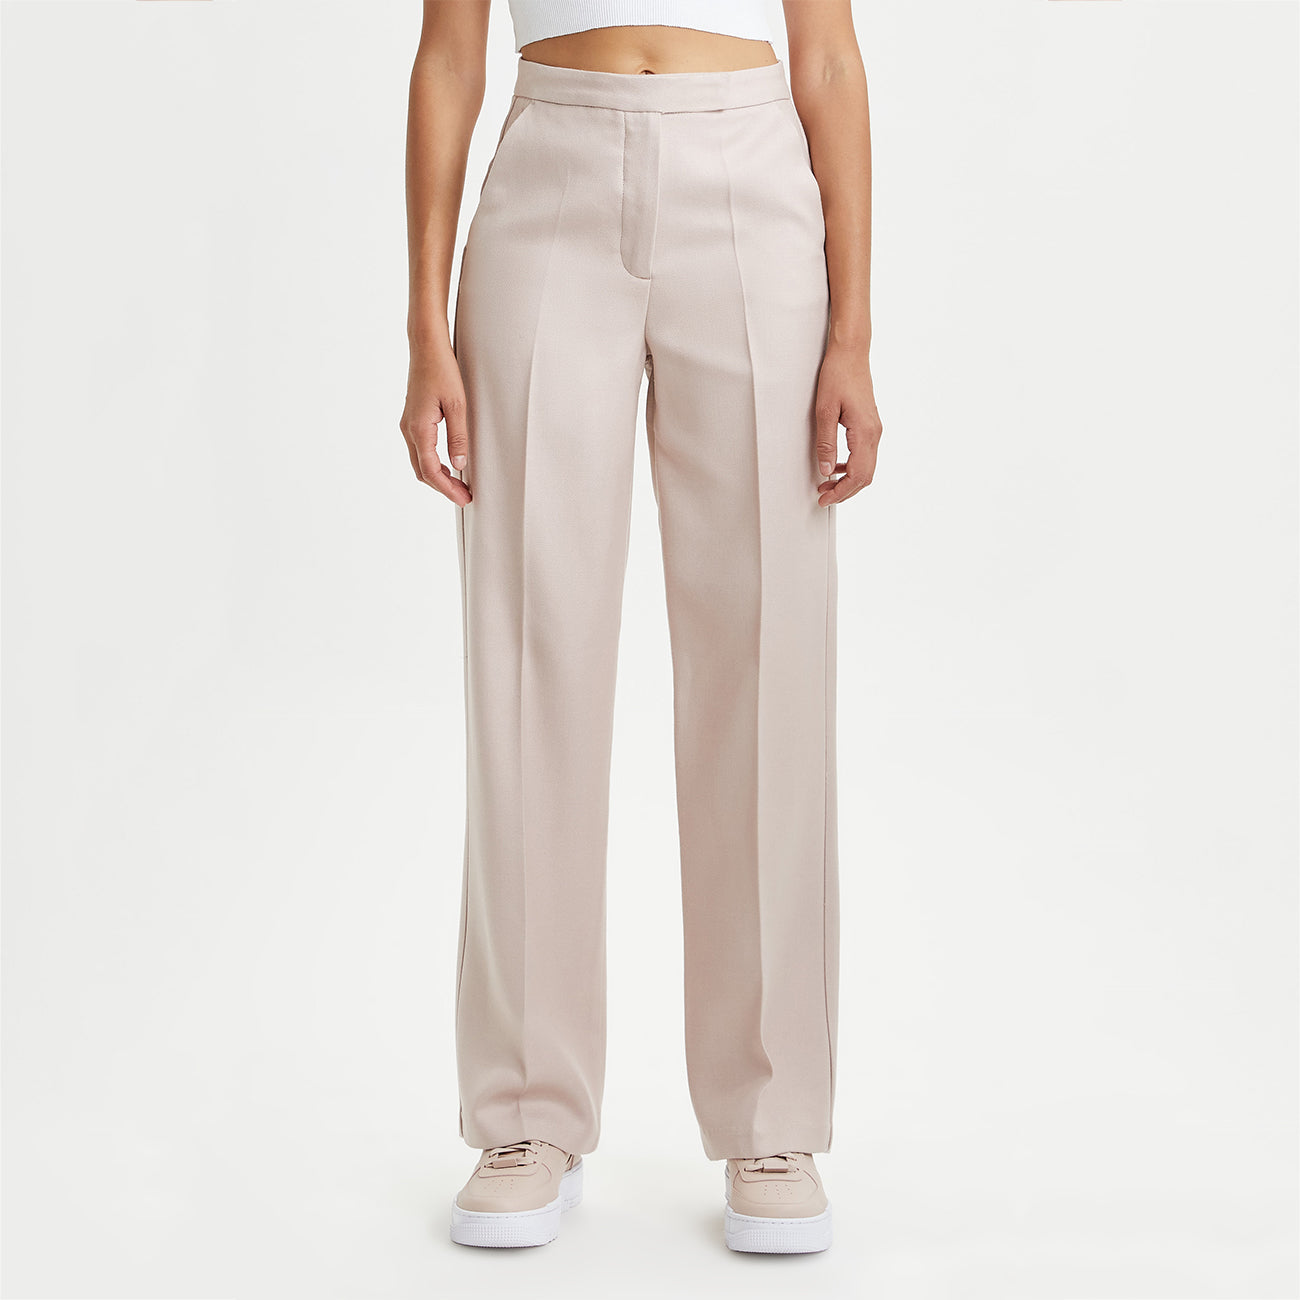 W BONNIE PANT DUSTED PINK